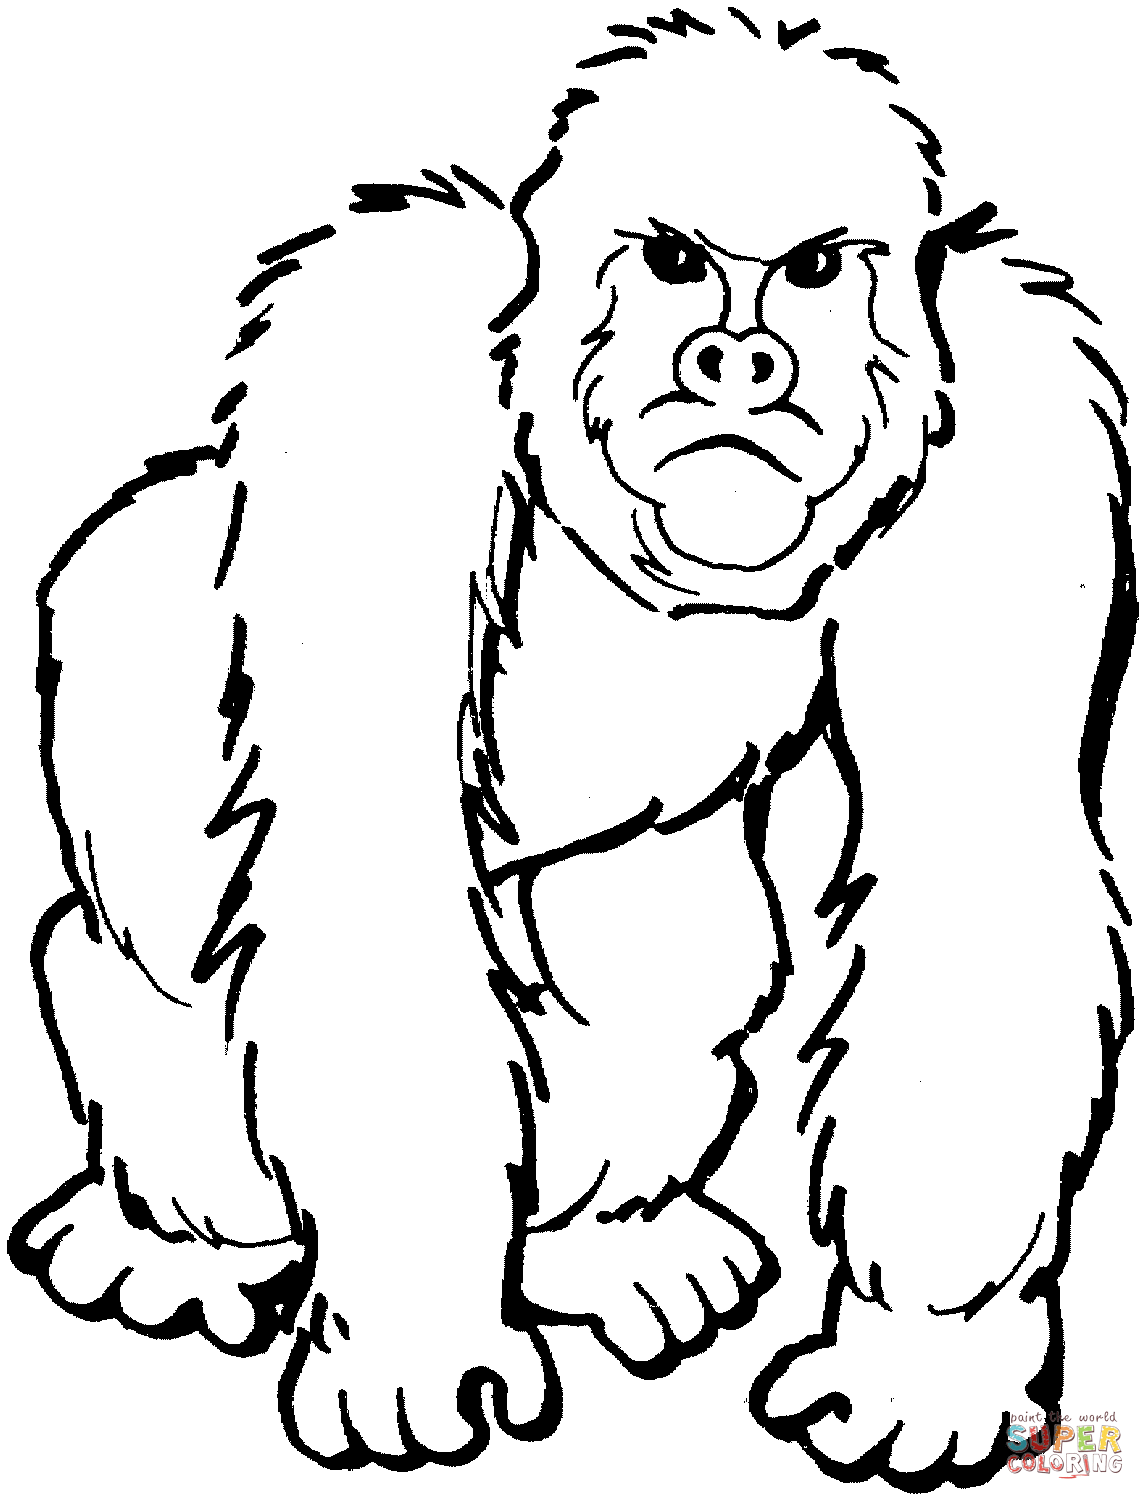 Gorillas coloring pages | Free Coloring Pages